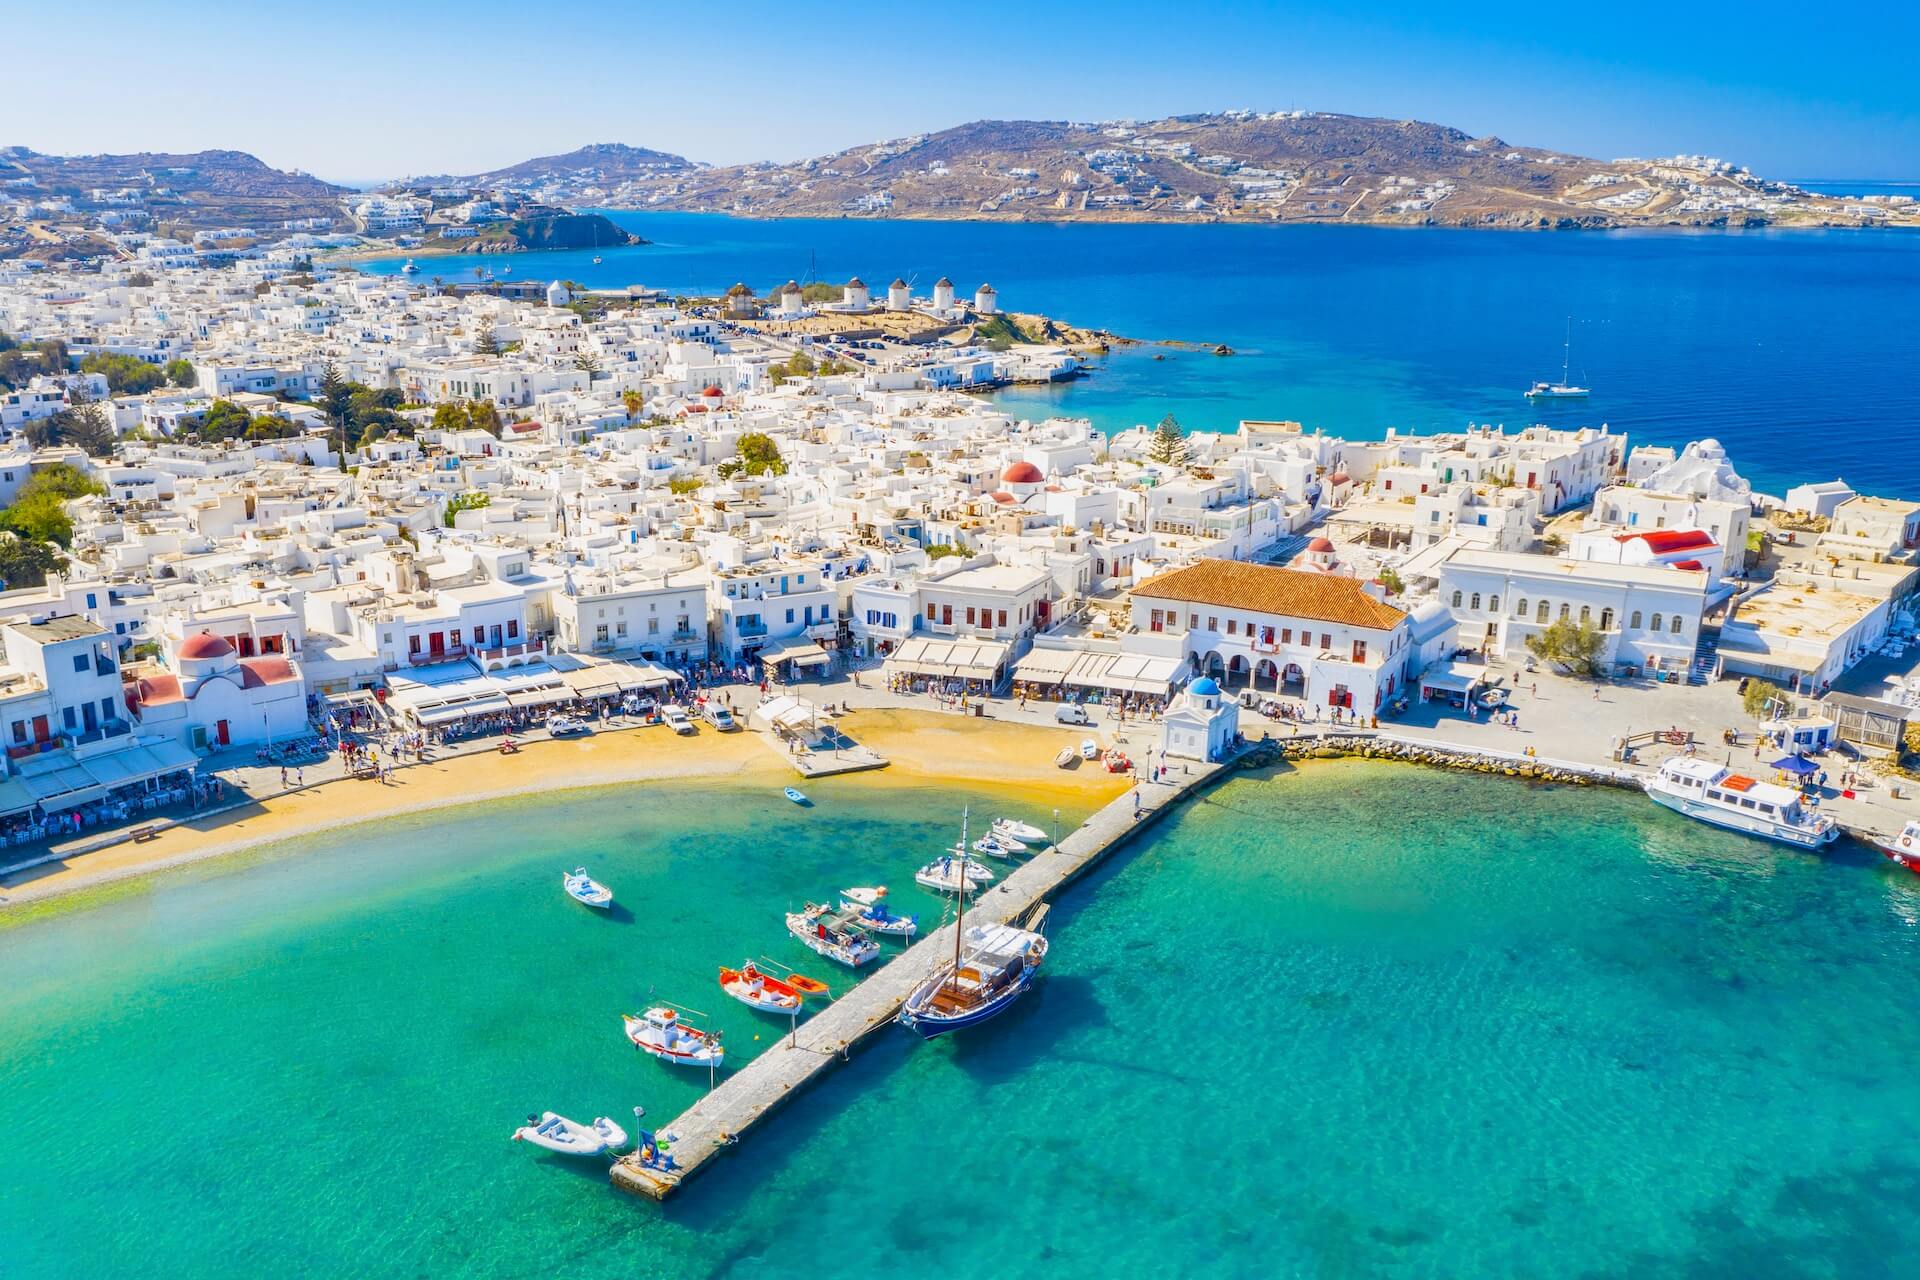 View of the old port in Mykonos